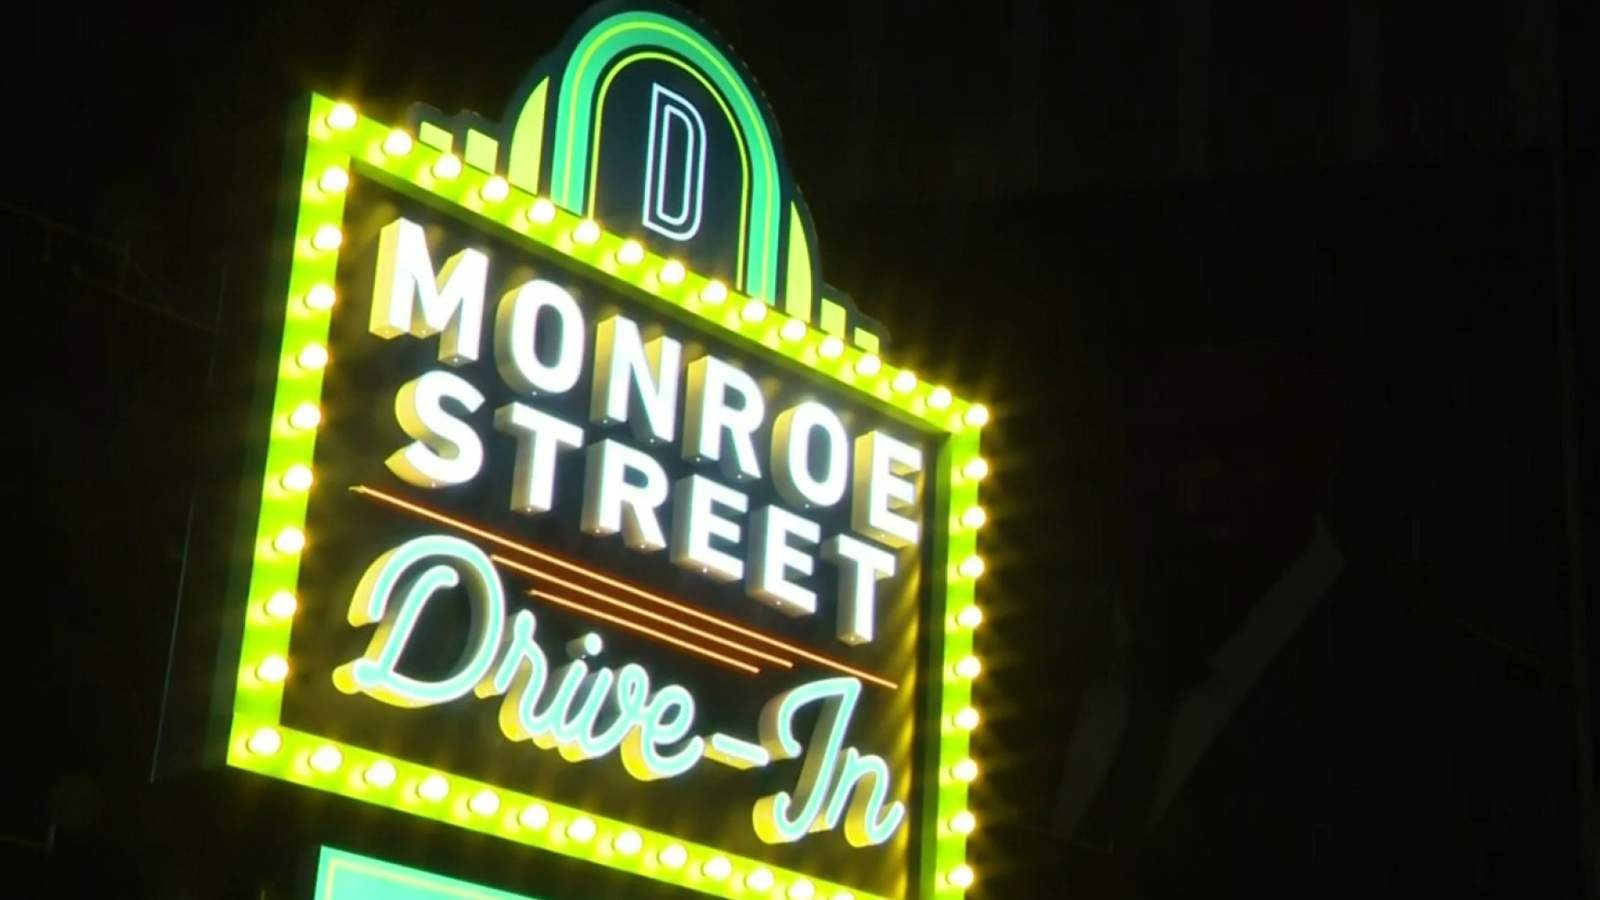 Families attend first night of drive-in theater in Downtown Detroit